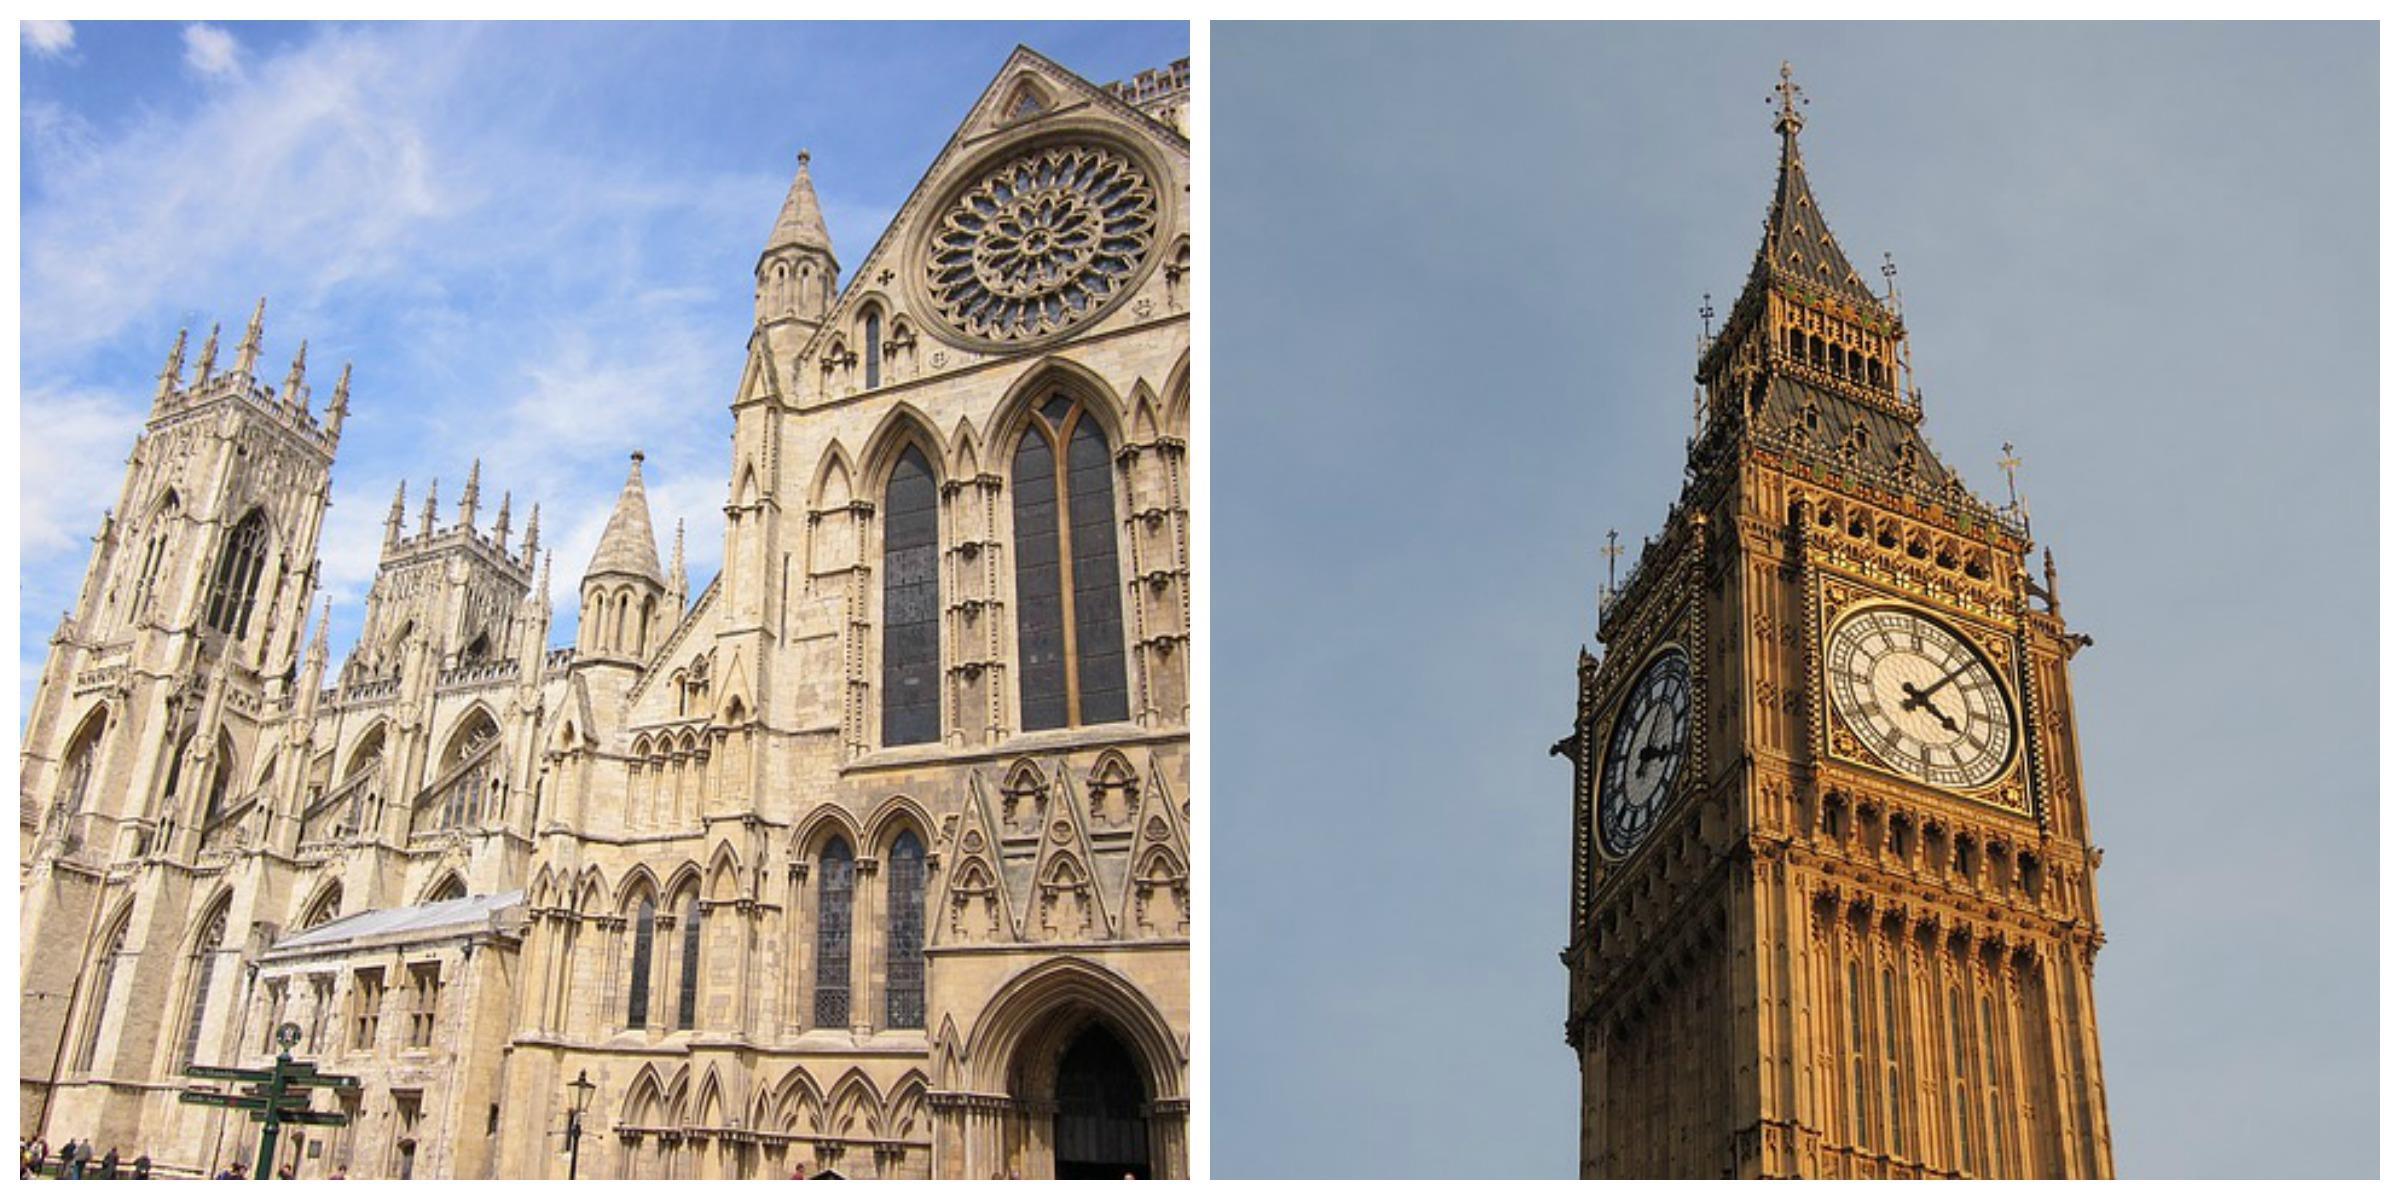 How expensive is it to live in York compared to London?